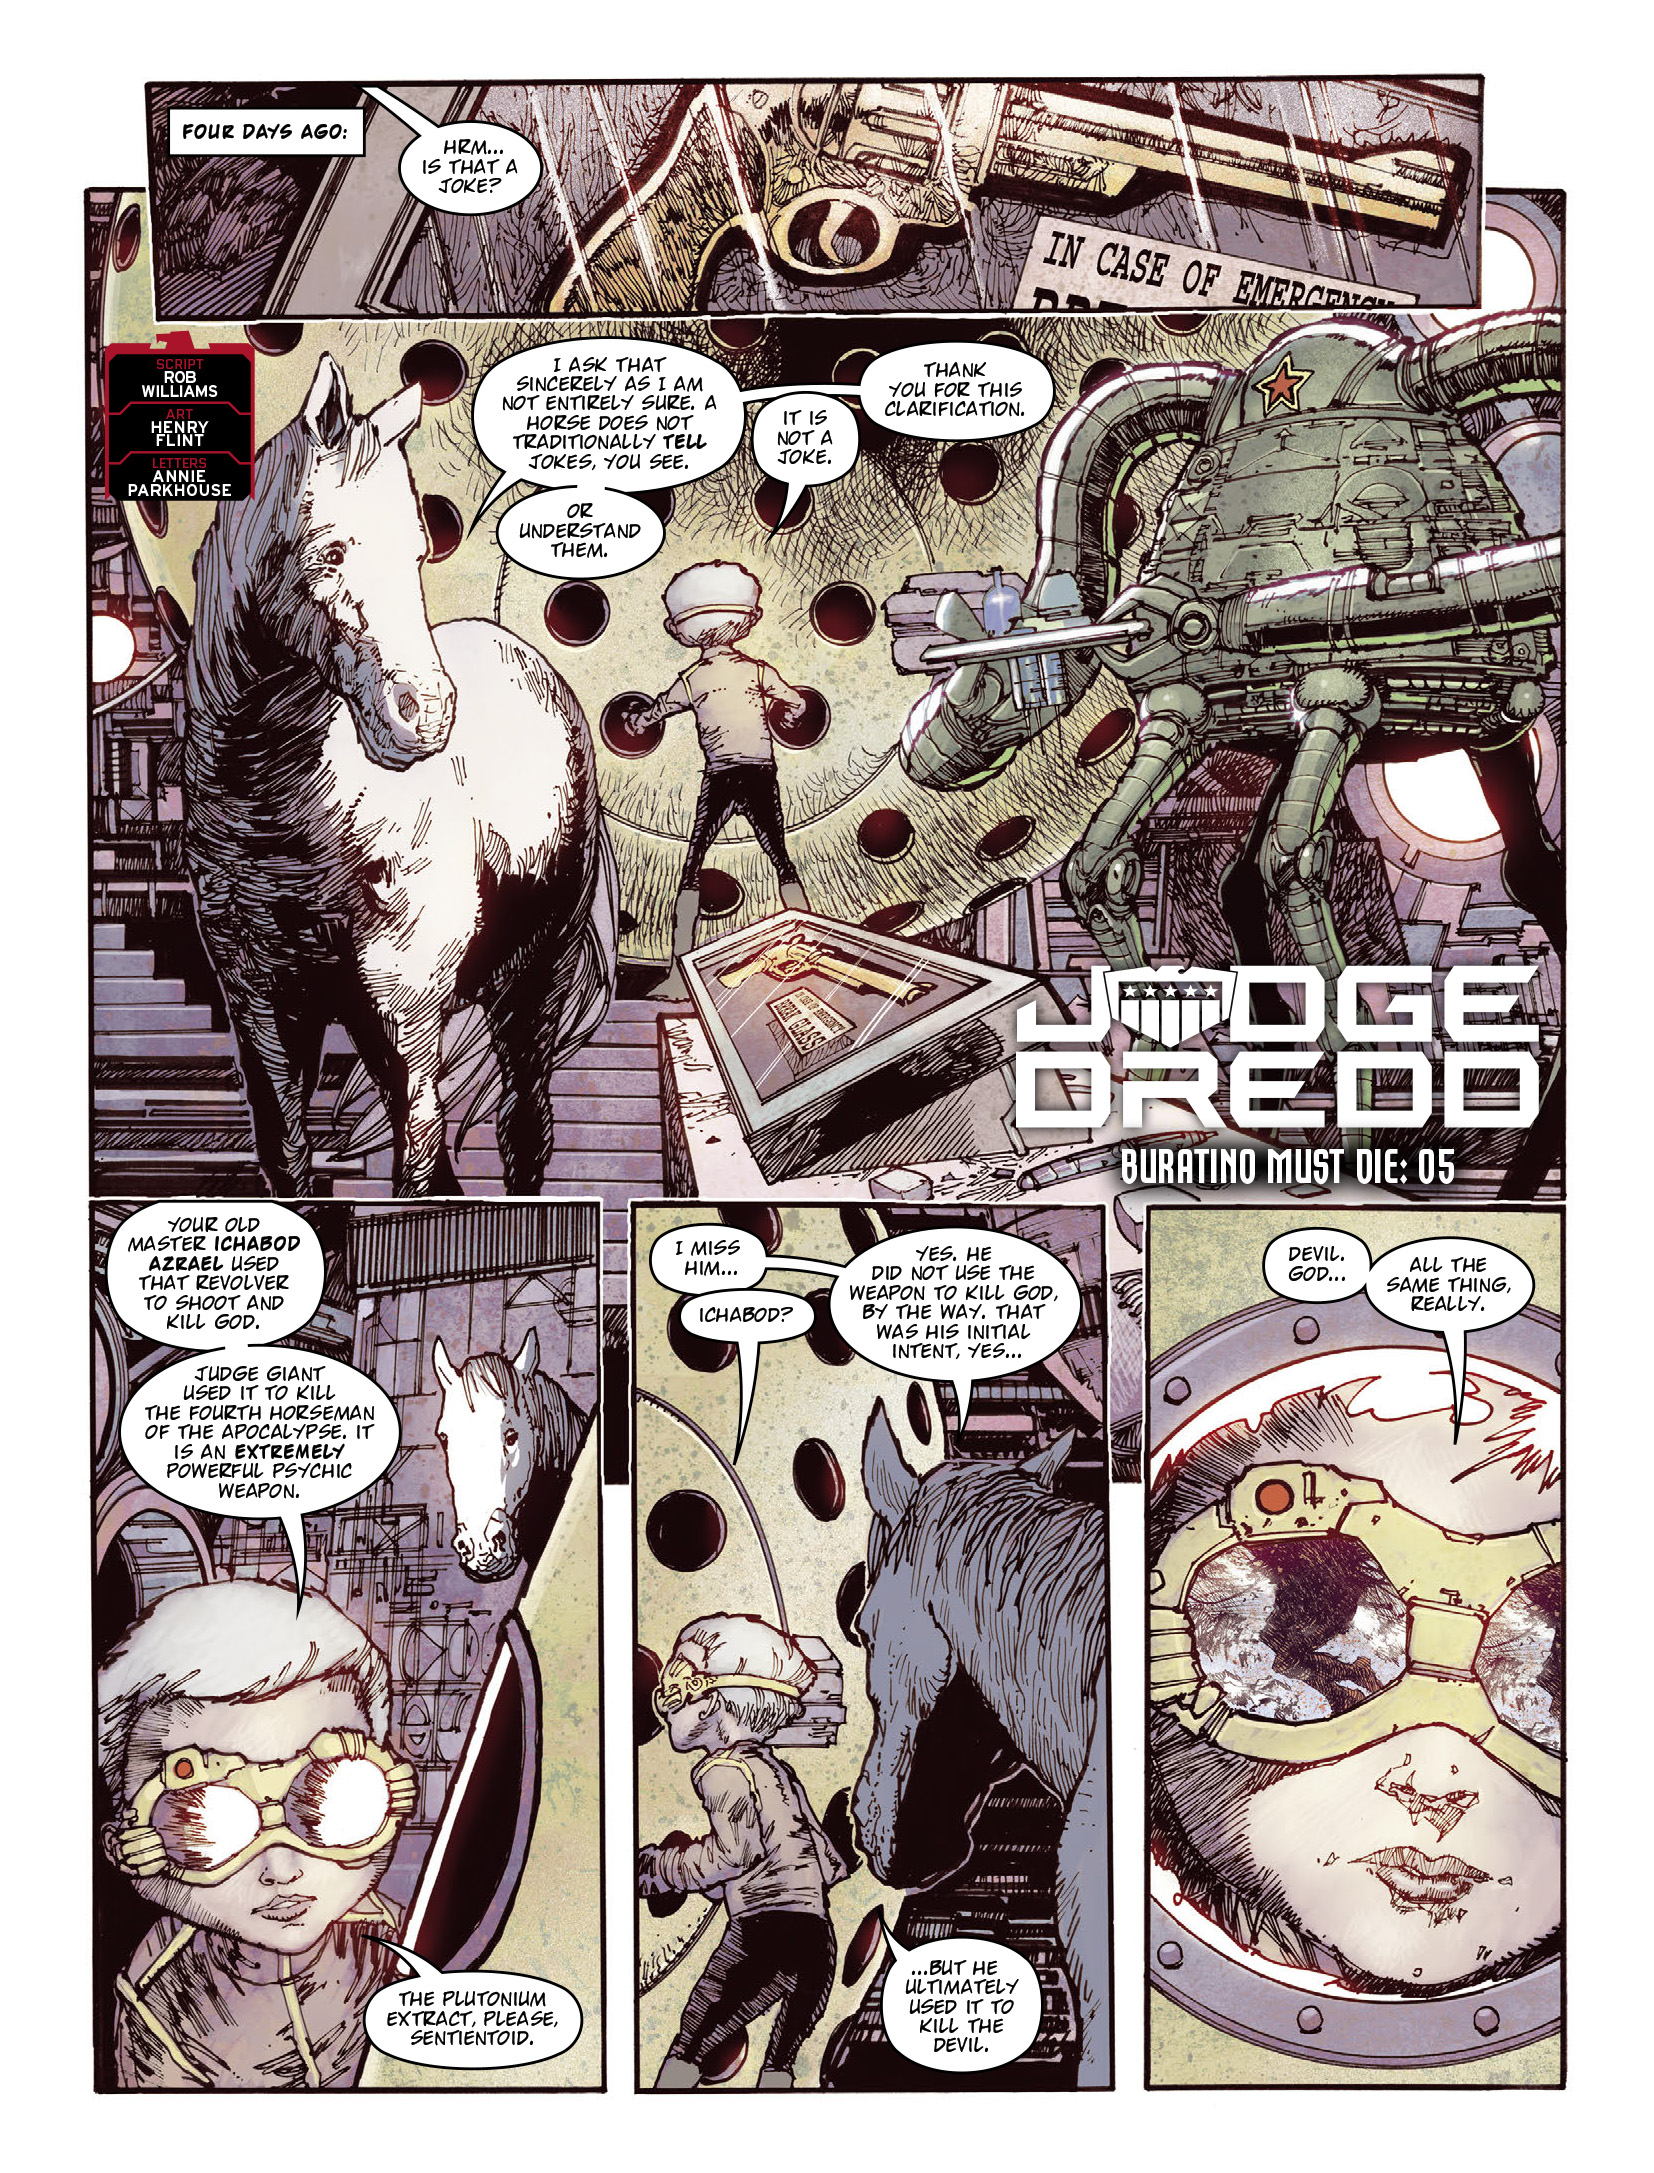 2000 AD: Chapter 2308 - Page 3